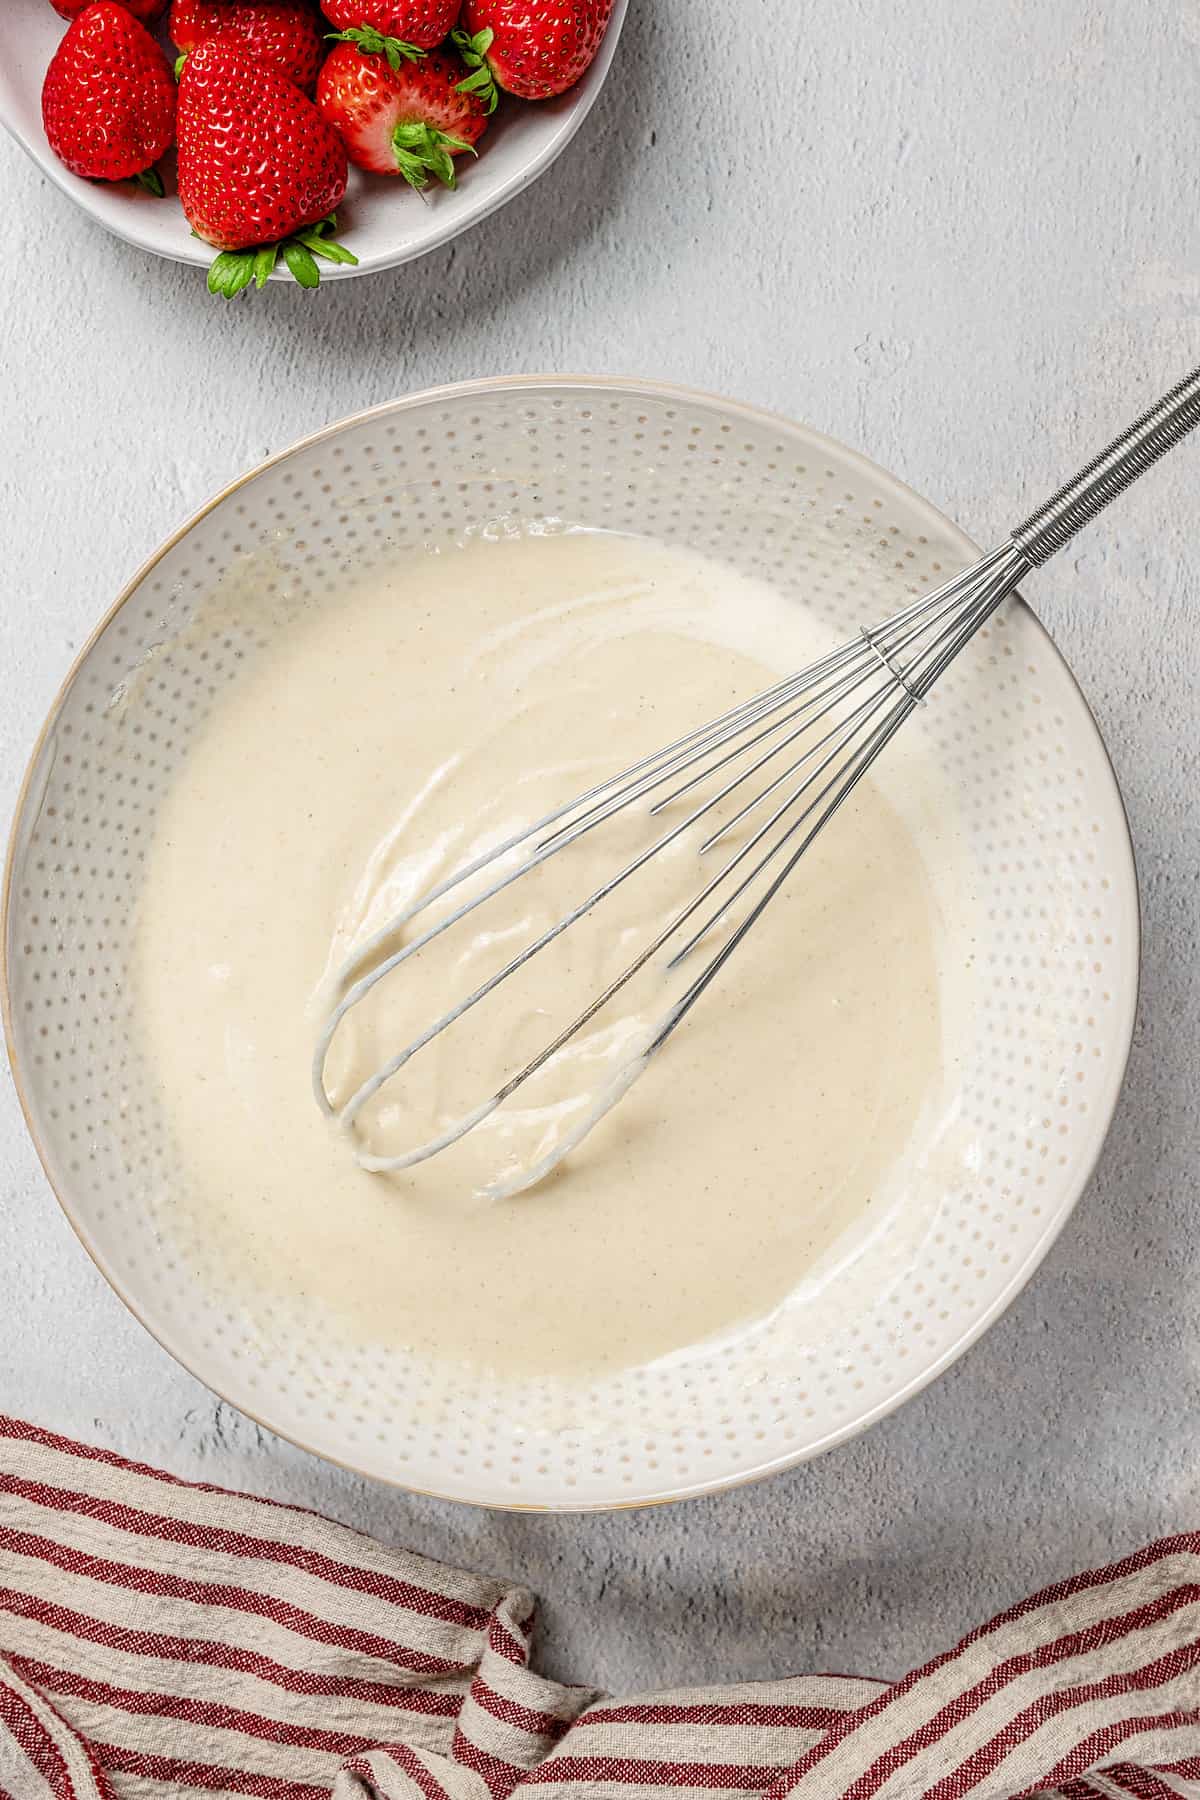 Gluten-free pikelet batter in a white mixing bowl with a whisk.